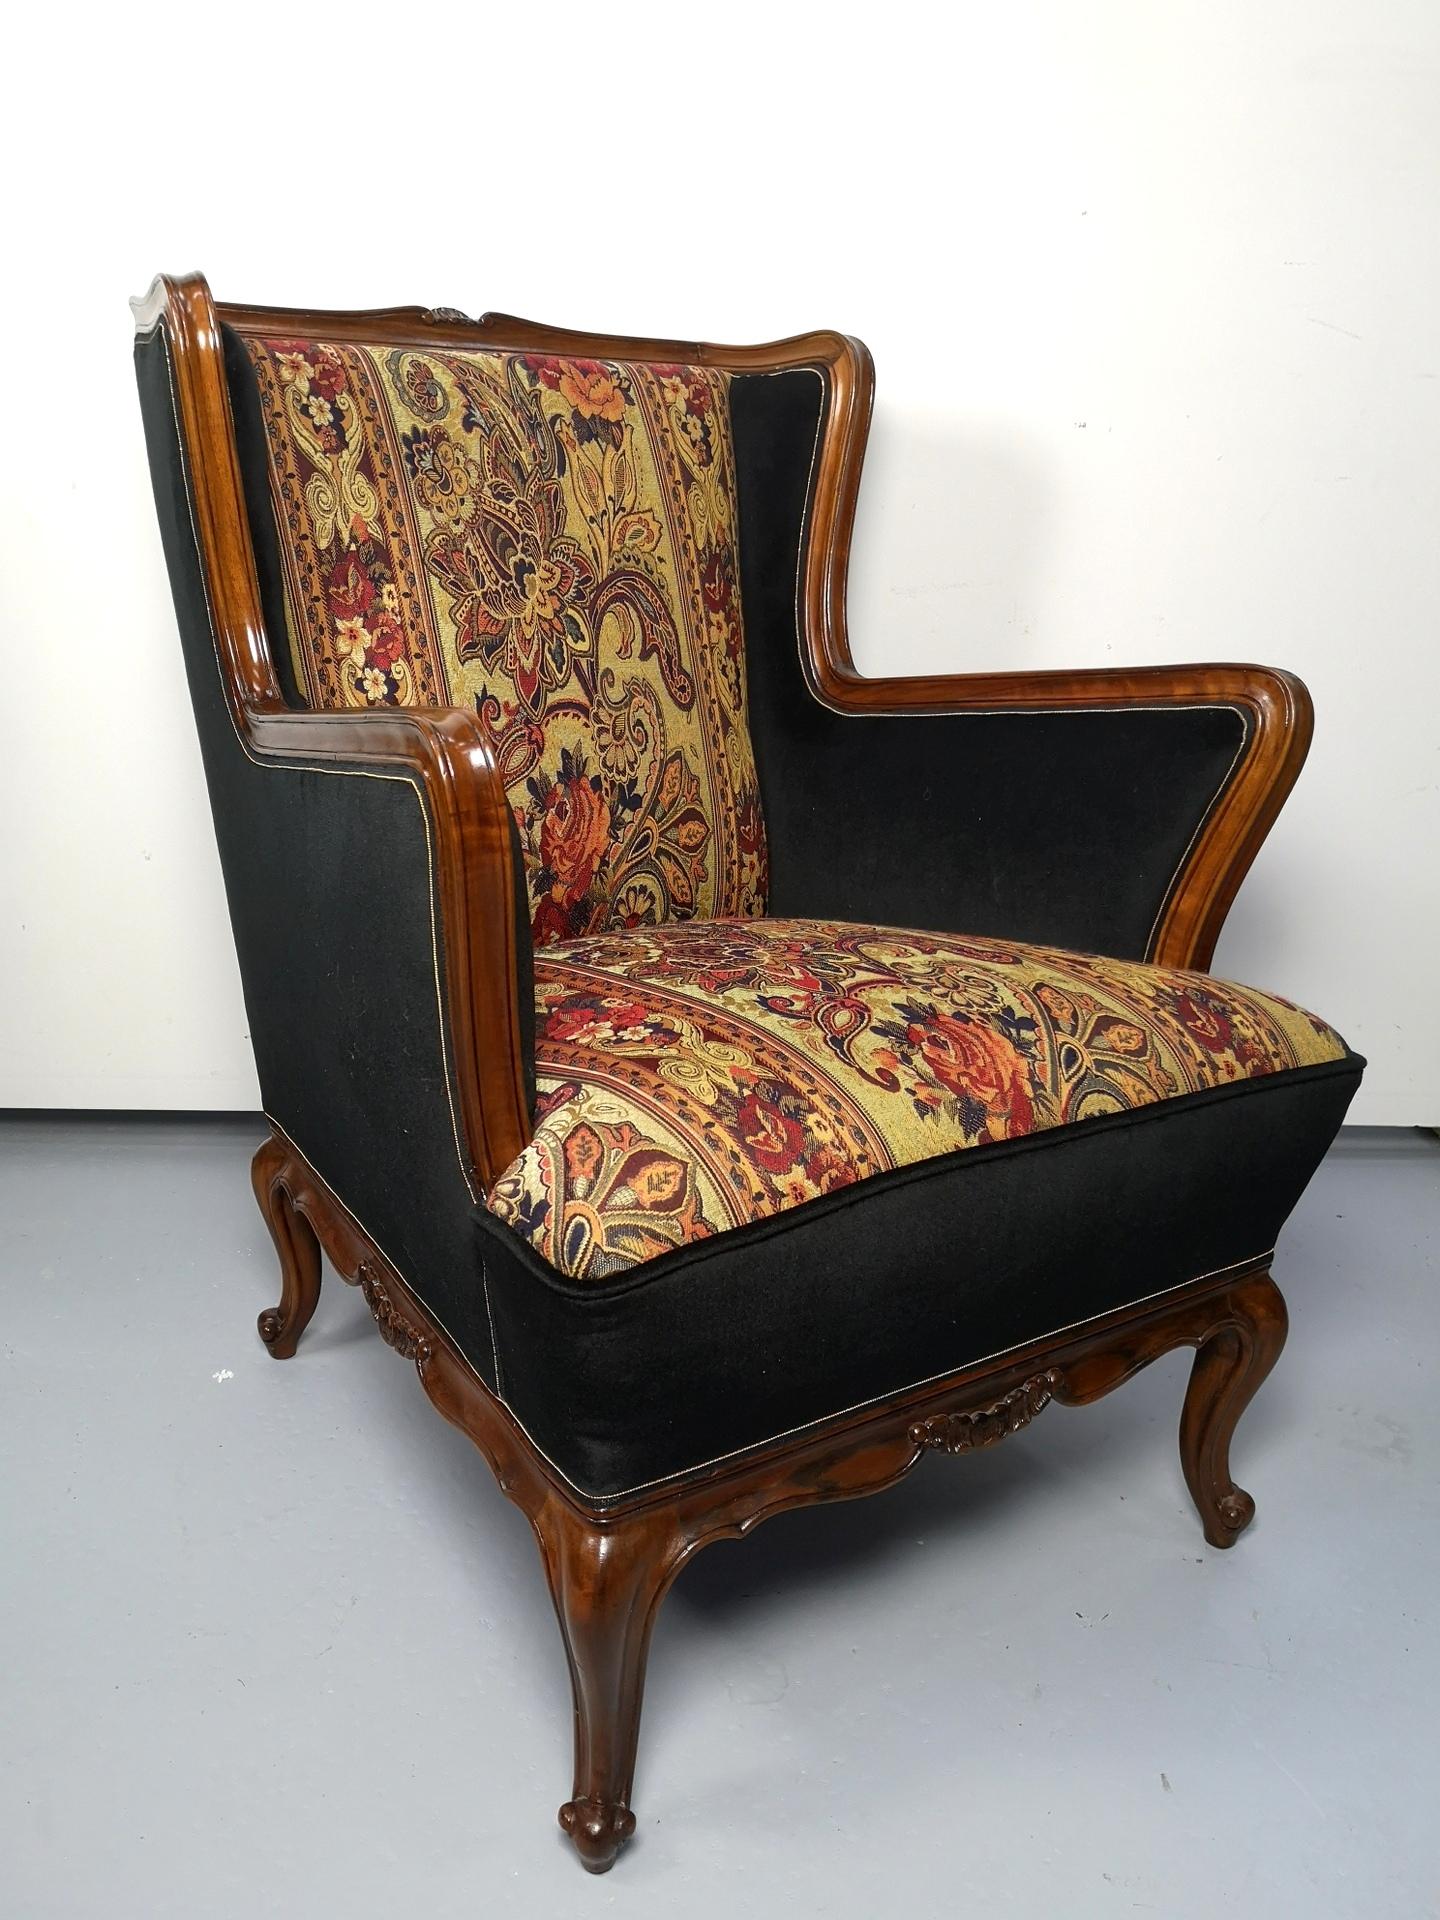 Neobaroque or Baroque revival, this three piece living room suite is restored to the highest standards. Reupholstered with black velvet and a luscious baroque carpit- refinished with French polish (shellac)

Measures: Sofa: 173 x 70 x 91 cm;